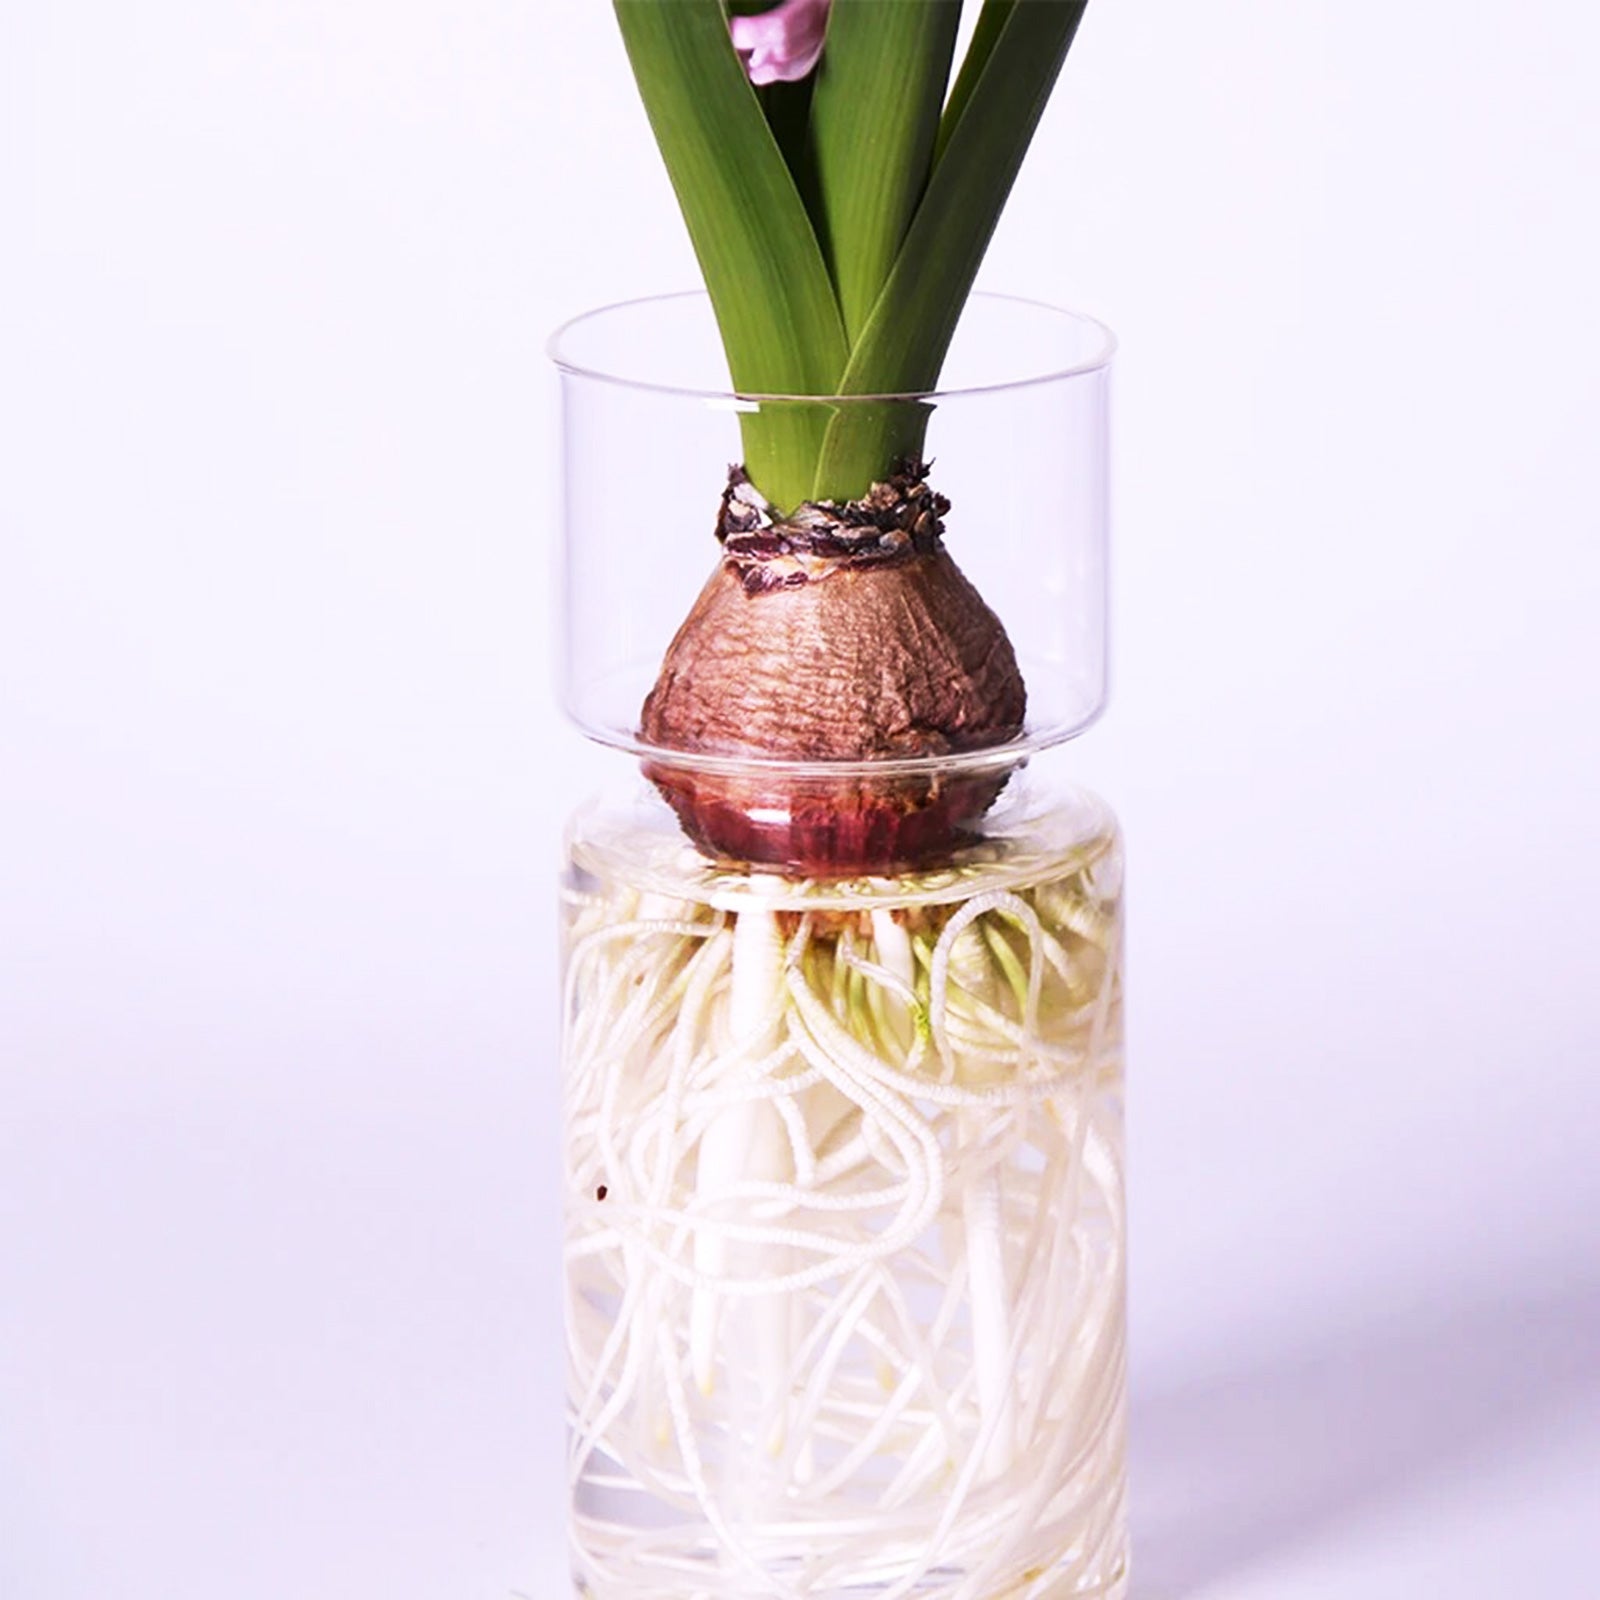 Decorative Glass Vase for Your Hydroponic Delights